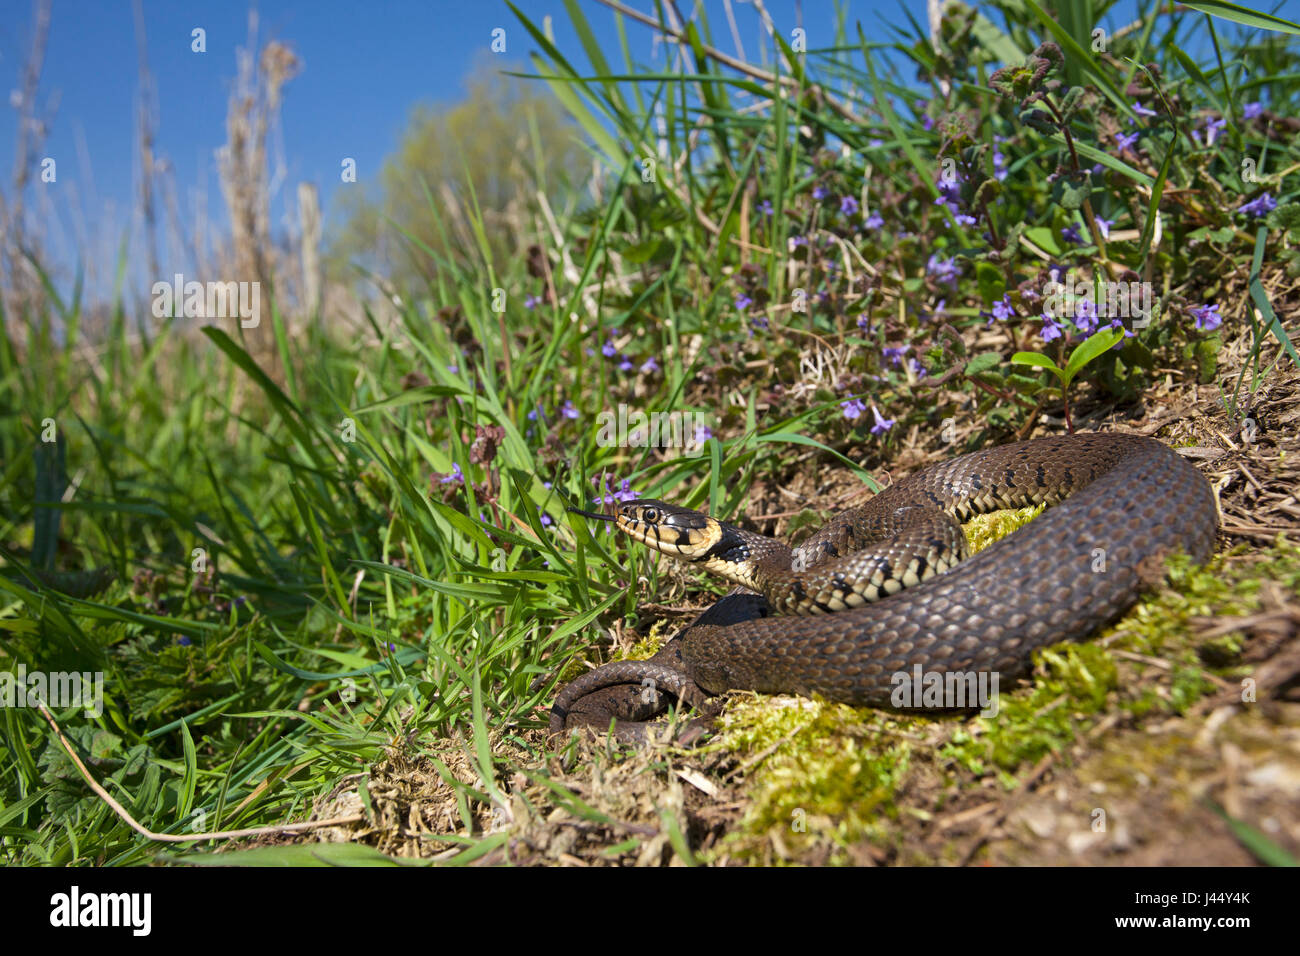 photo of a basking grass snake between grass and purple flowers Stock Photo